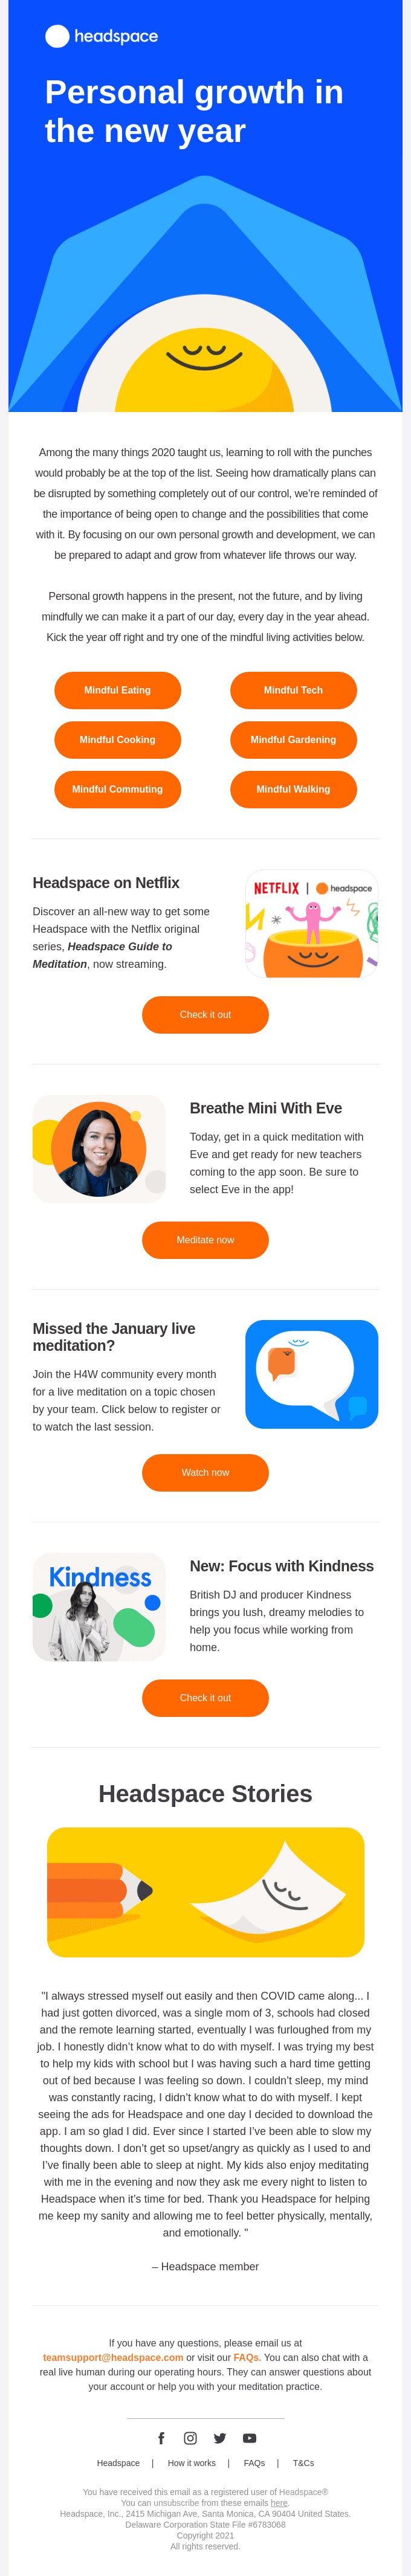 January Email Newsletter Guide: Ideas